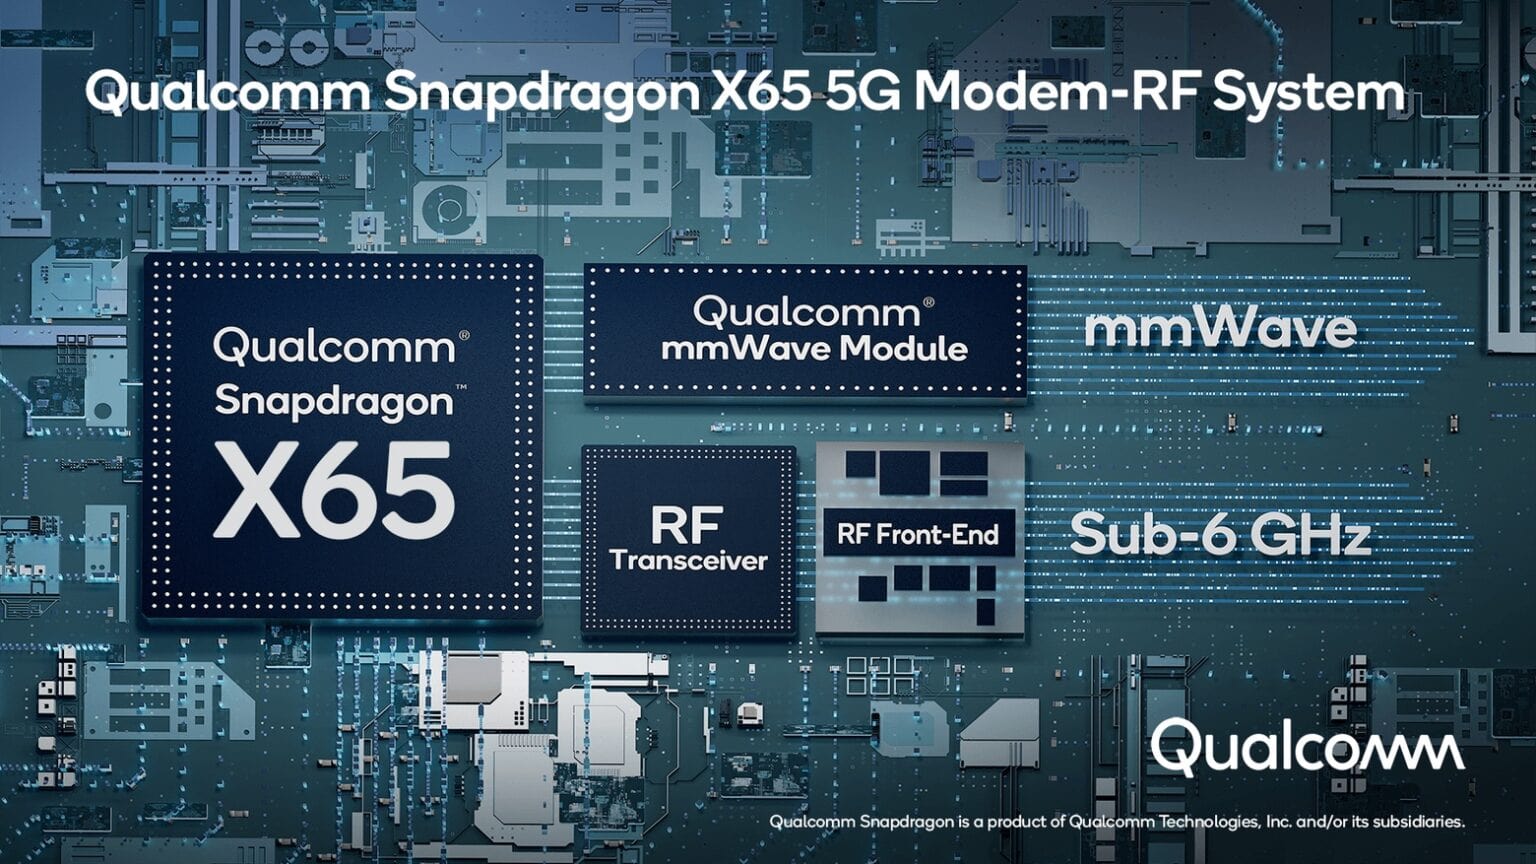 The next iPhone might use the speedy Snapdragon X65 5G modem